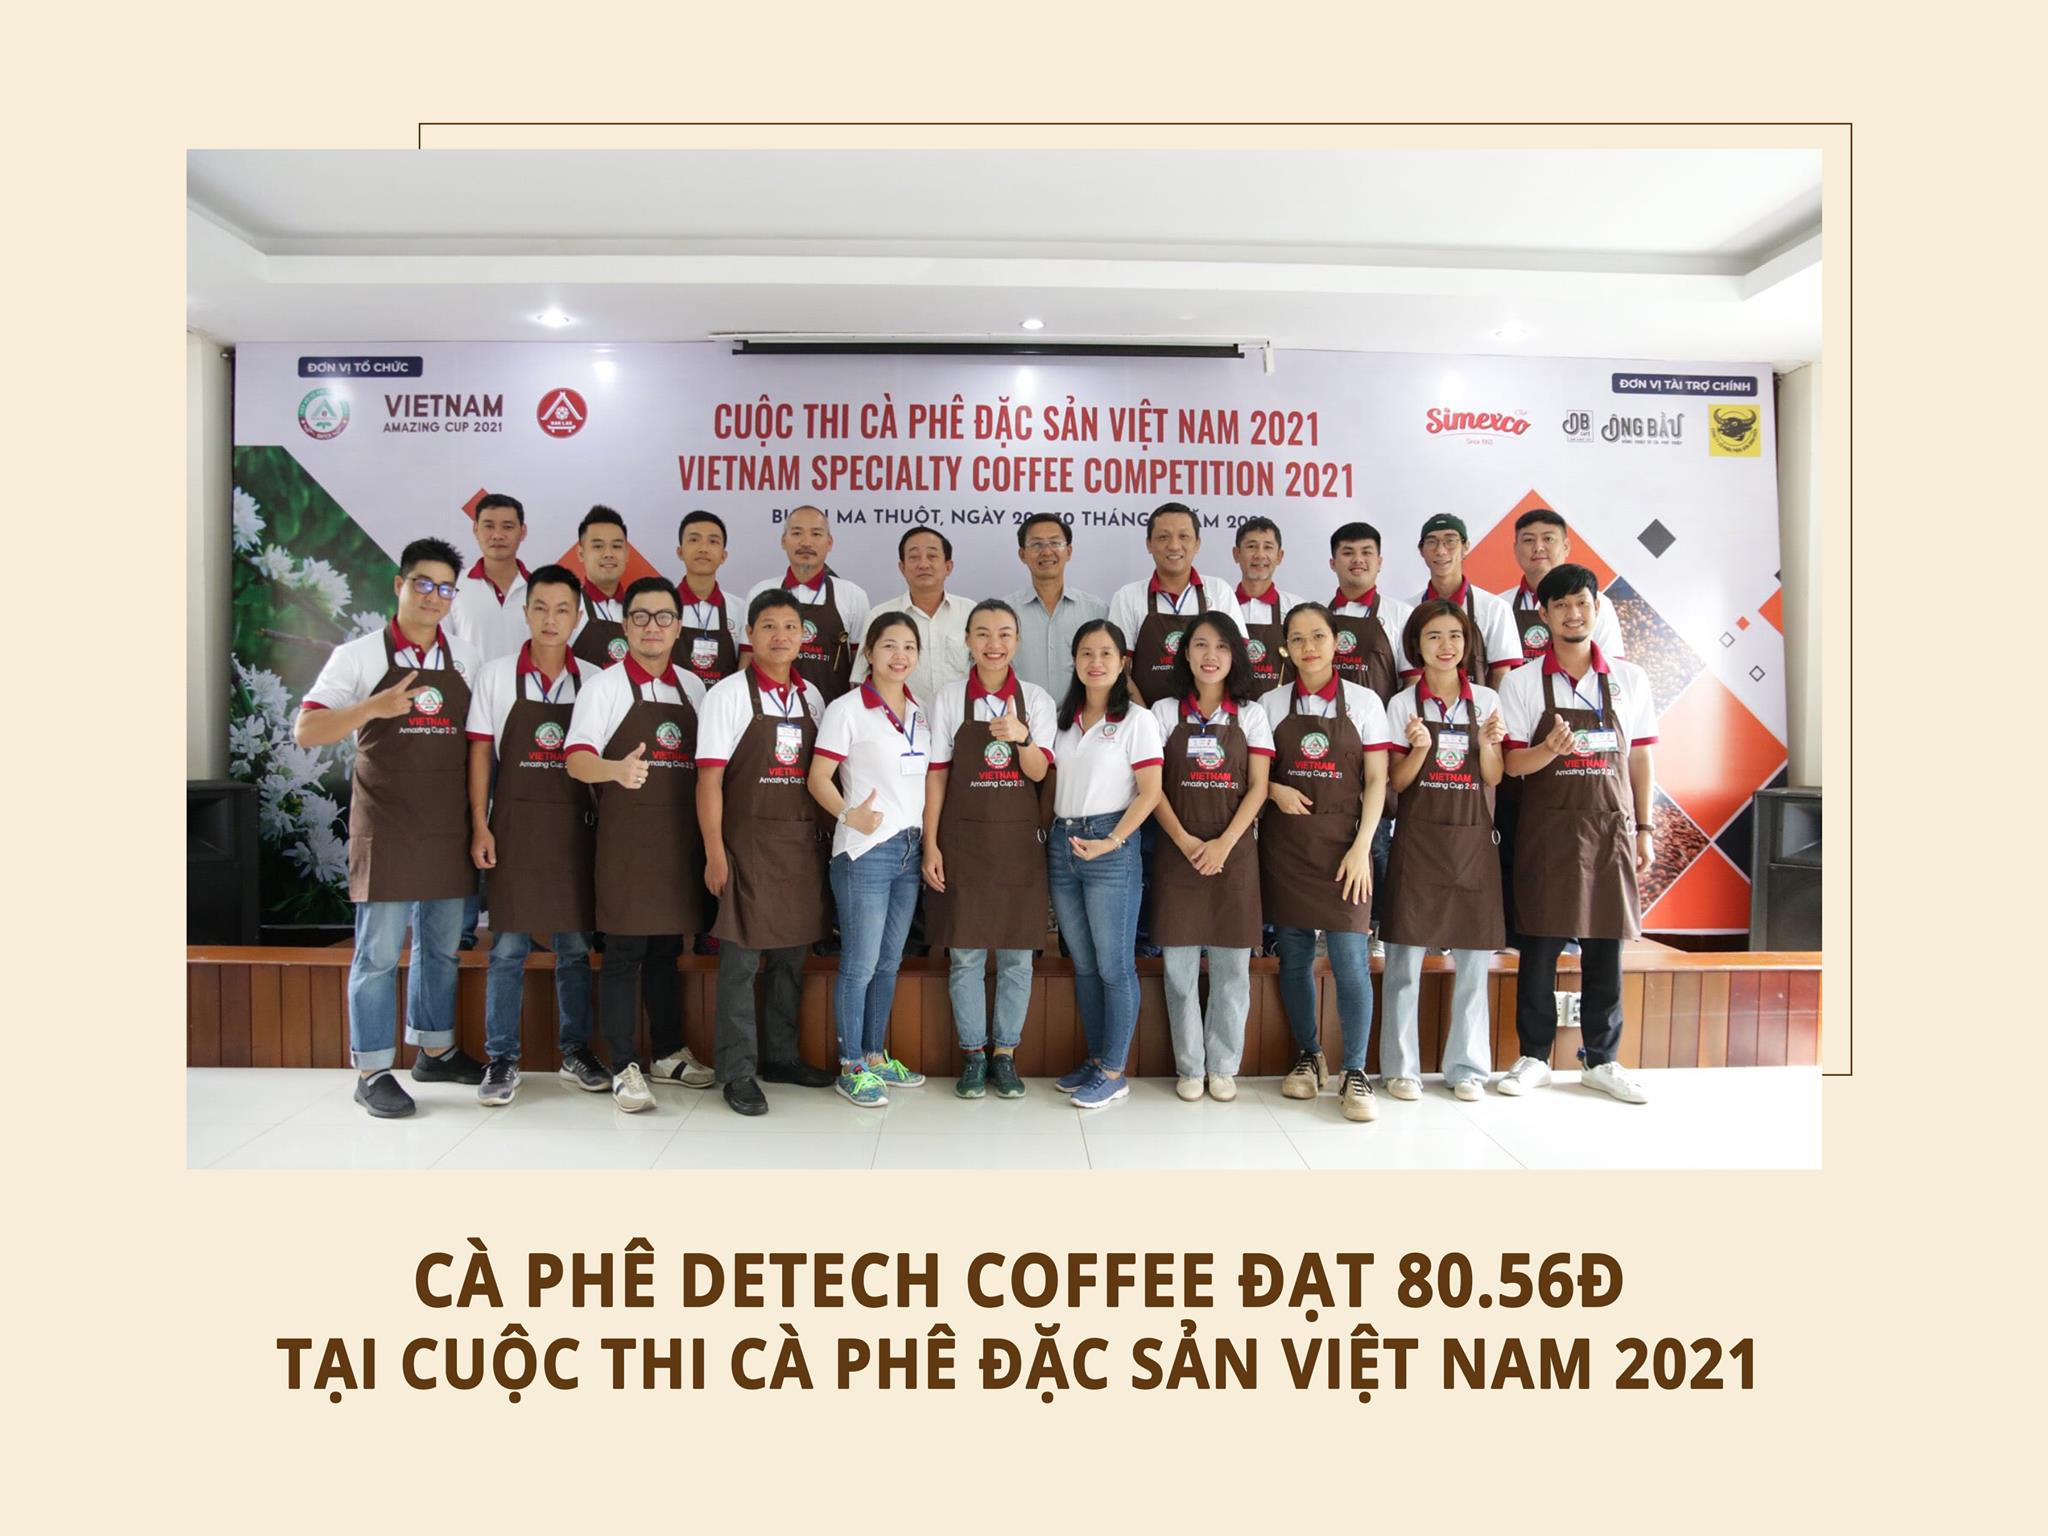 Detech Coffee is officially recognized as a specialty coffee